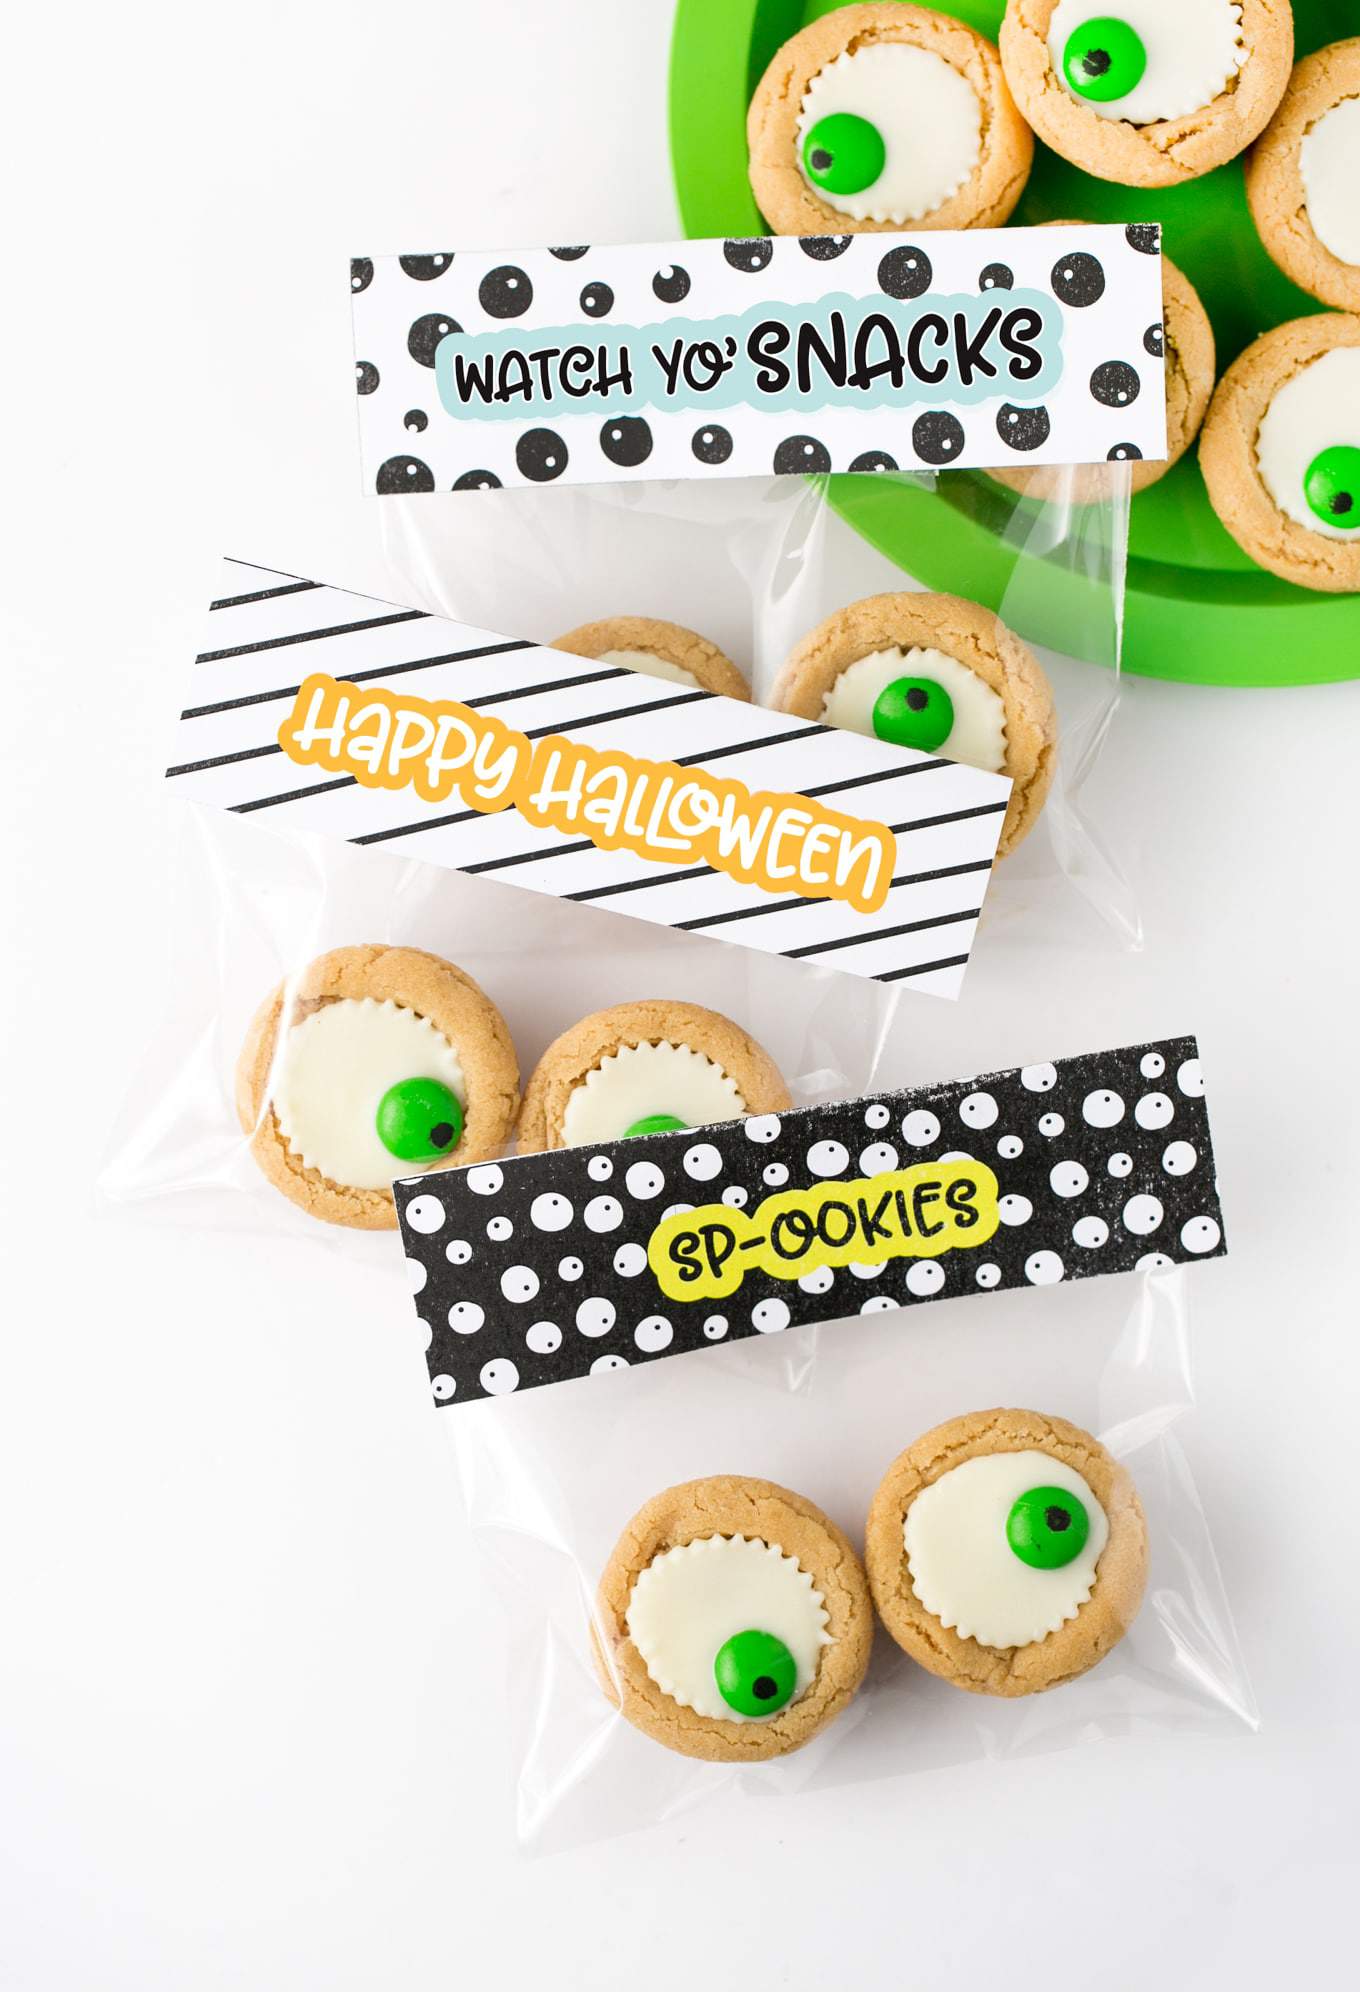 Easy Halloween Eyeball Cookies the kids can help with! After baking, simply press a miniature white peanut butter cup and M&M into the top of each one for a spooky (but cute!) halloween cookie idea.  #Halloween #Cookies #EyeballCookies | www.DesignEatRepeat.com